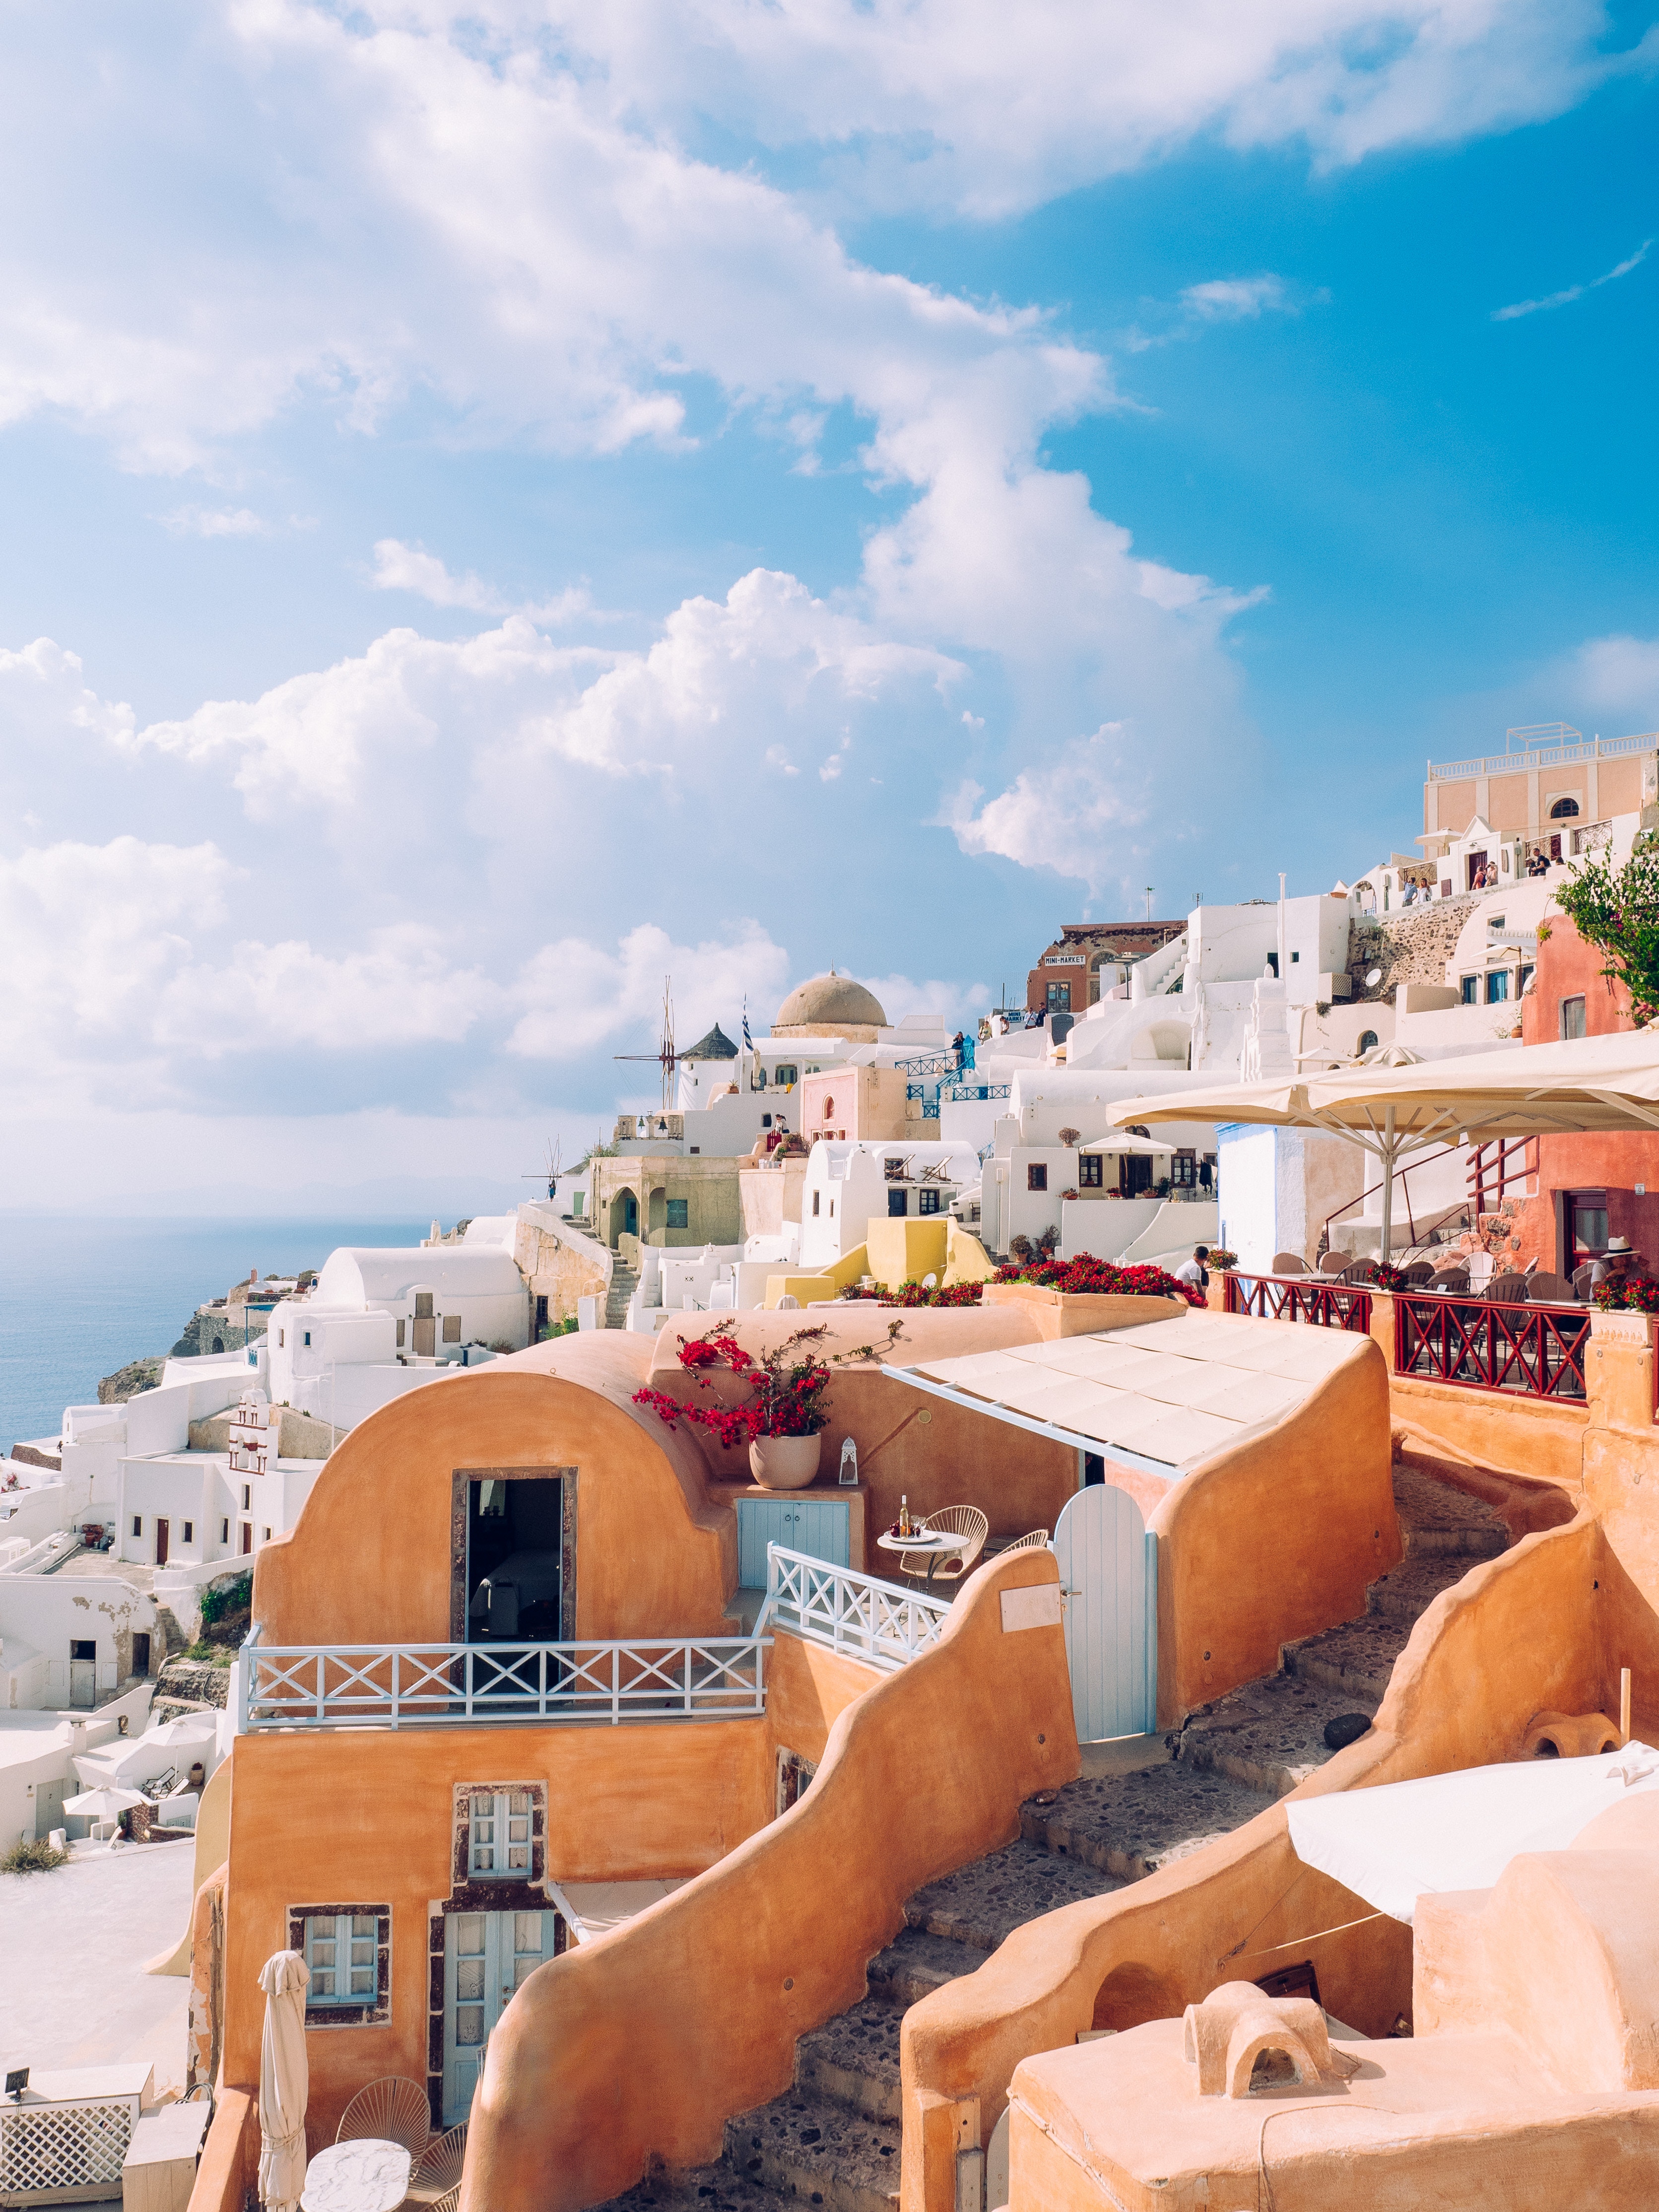 100 Beautiful Greece Pictures  Download Free Images on Unsplash